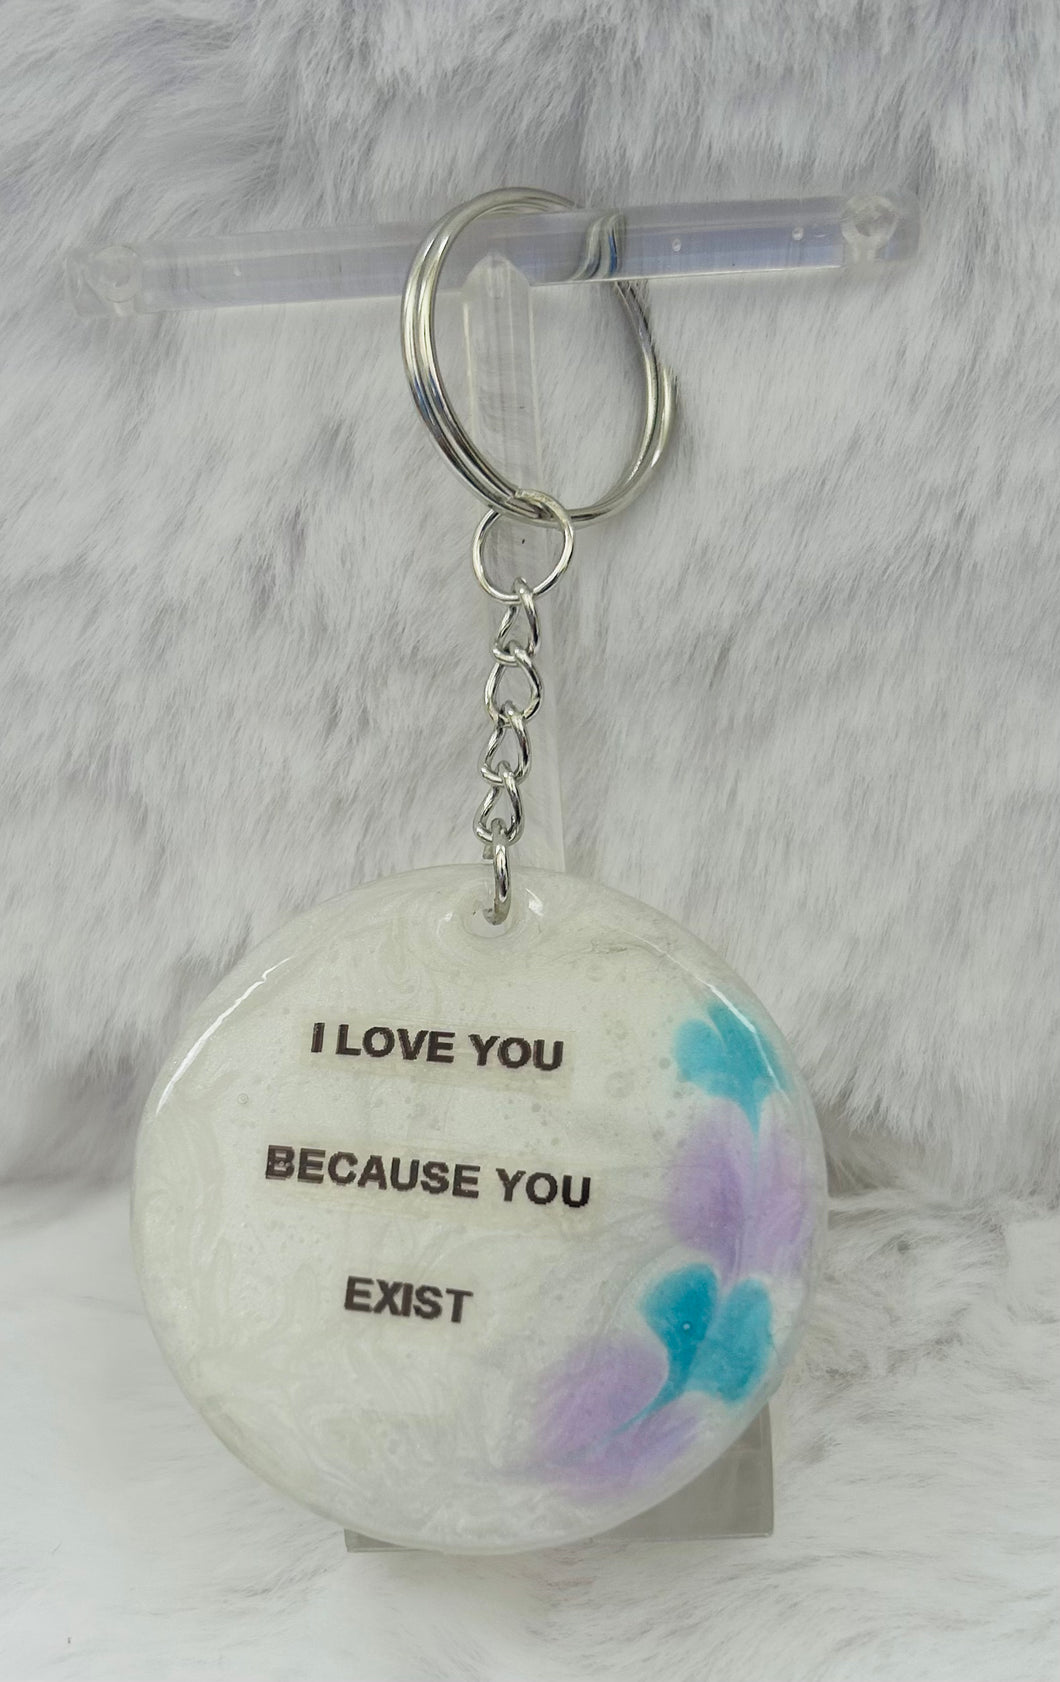 CHELLE’S CRAFTS & MORE (SIGNATURE KEYCHAIN)